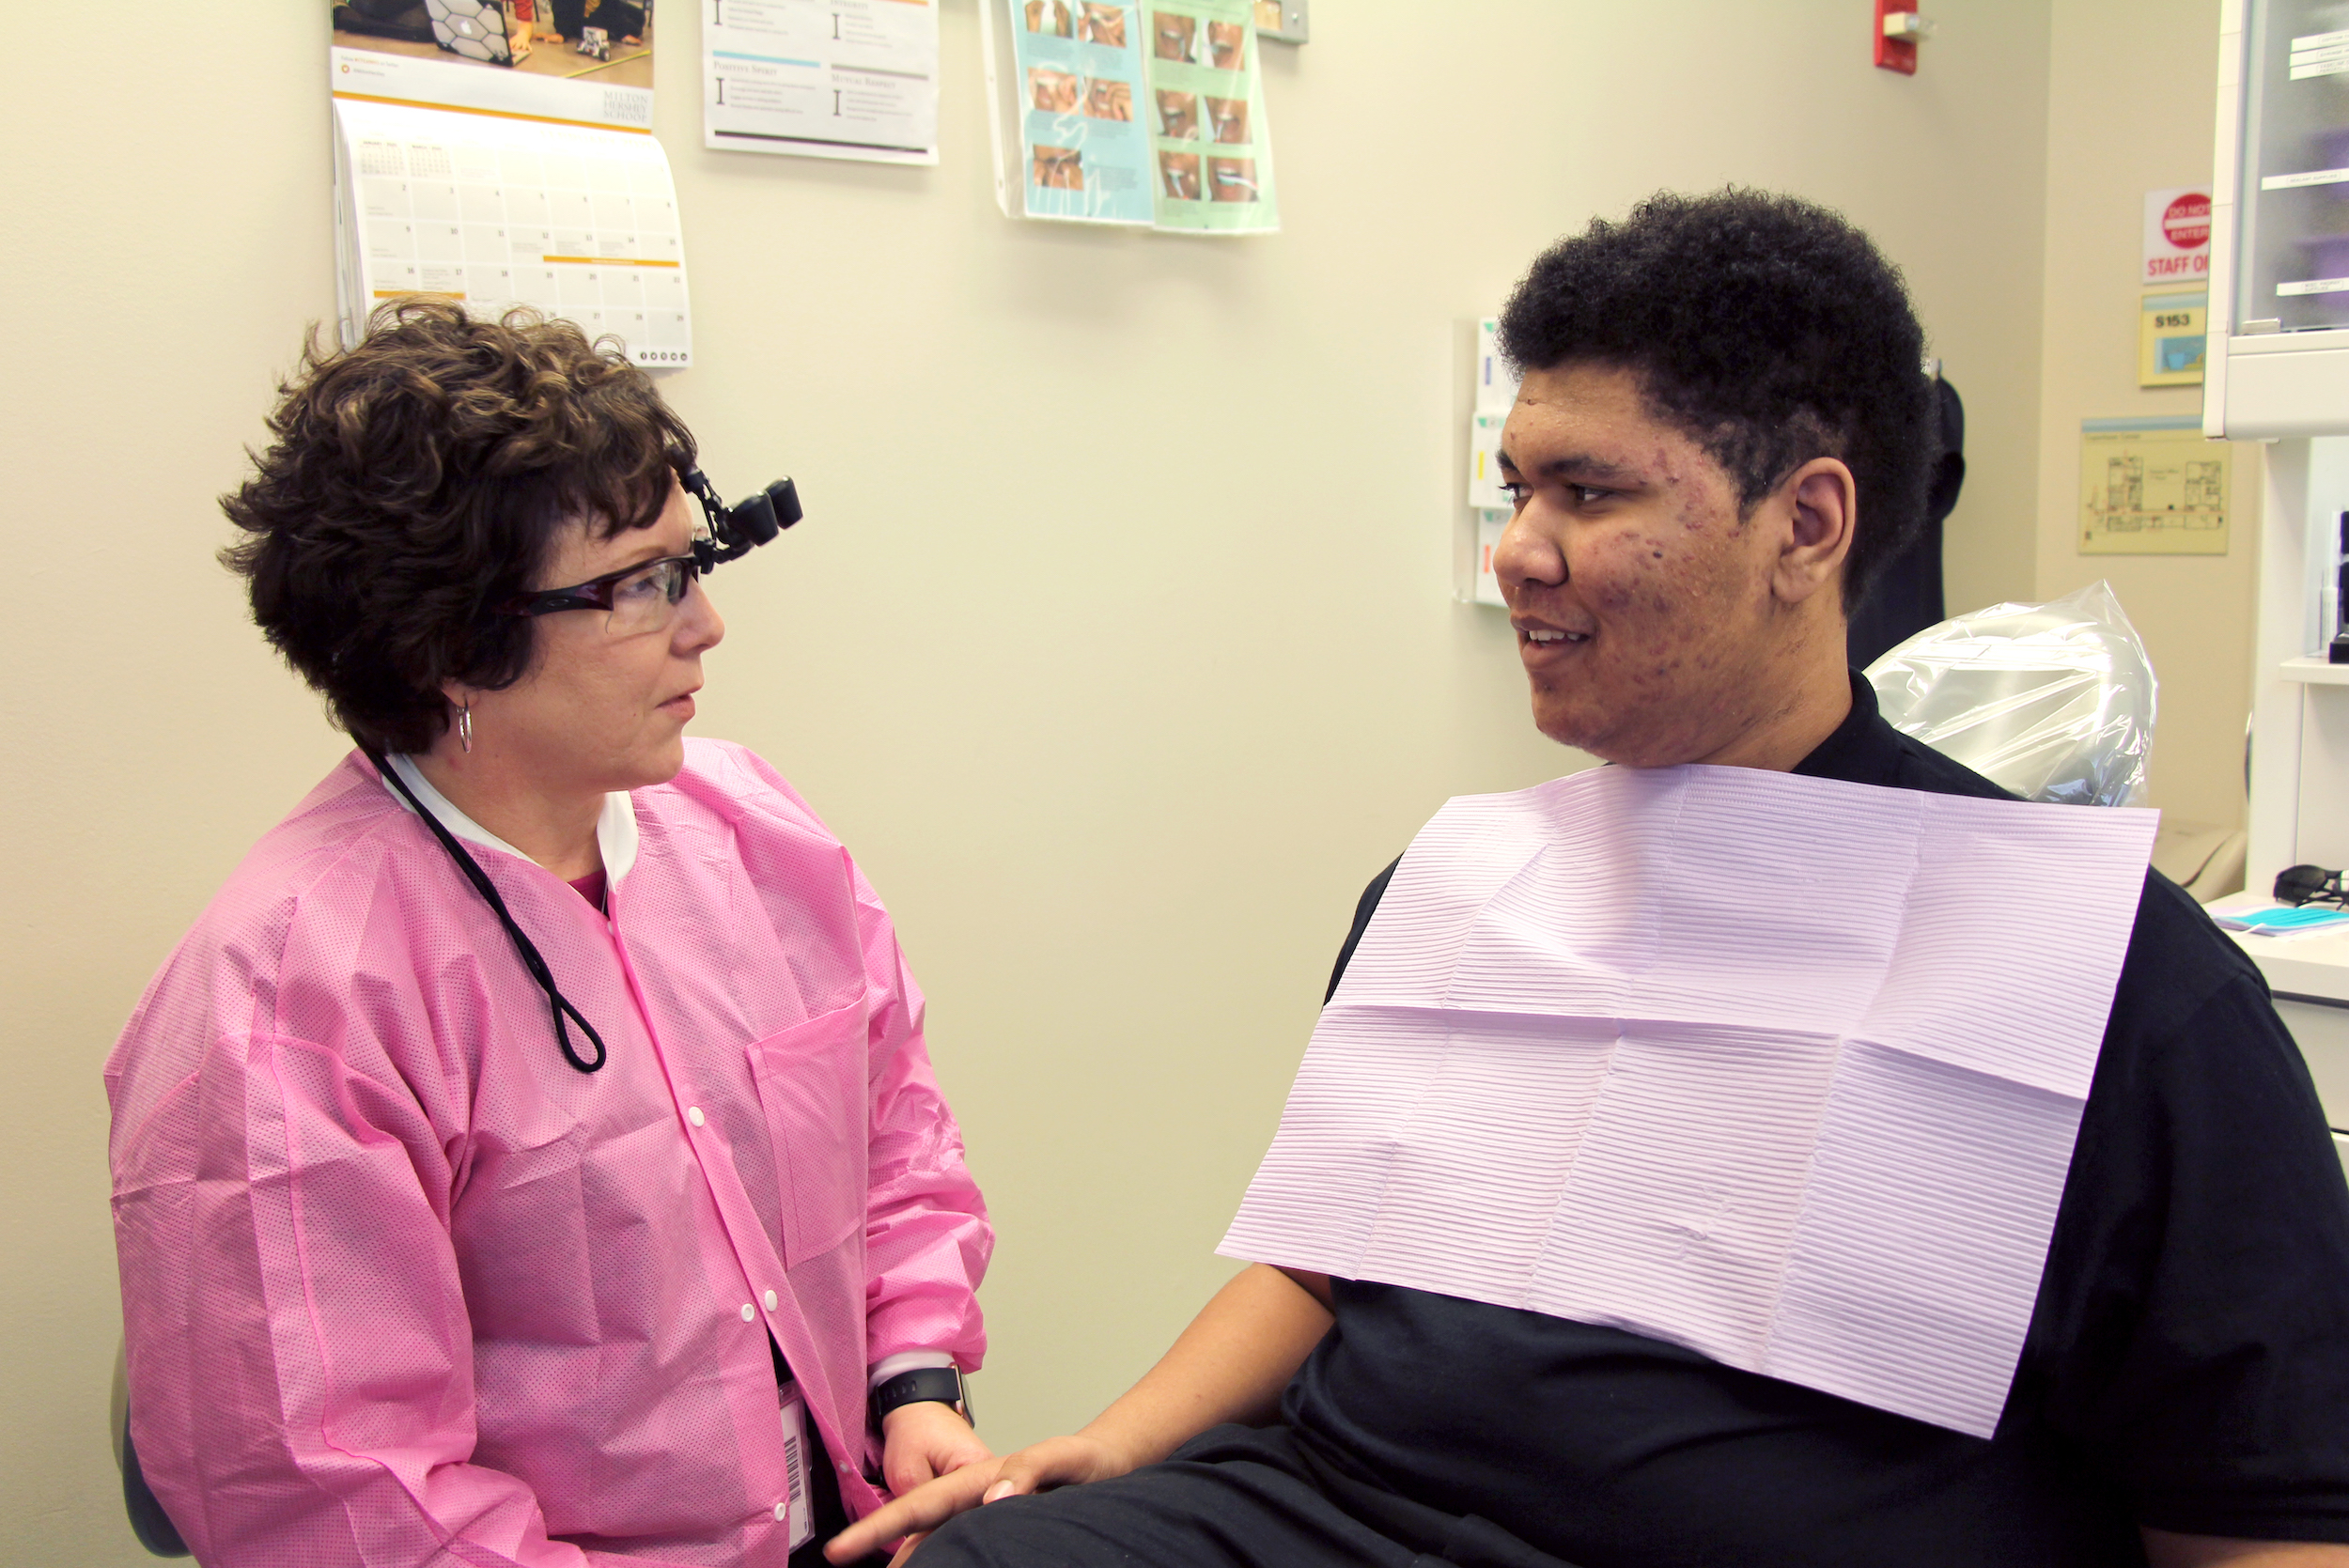 Milton Hershey School student Davontae talks about oral health with his MHS dental hygienist, Karen before his treatment.